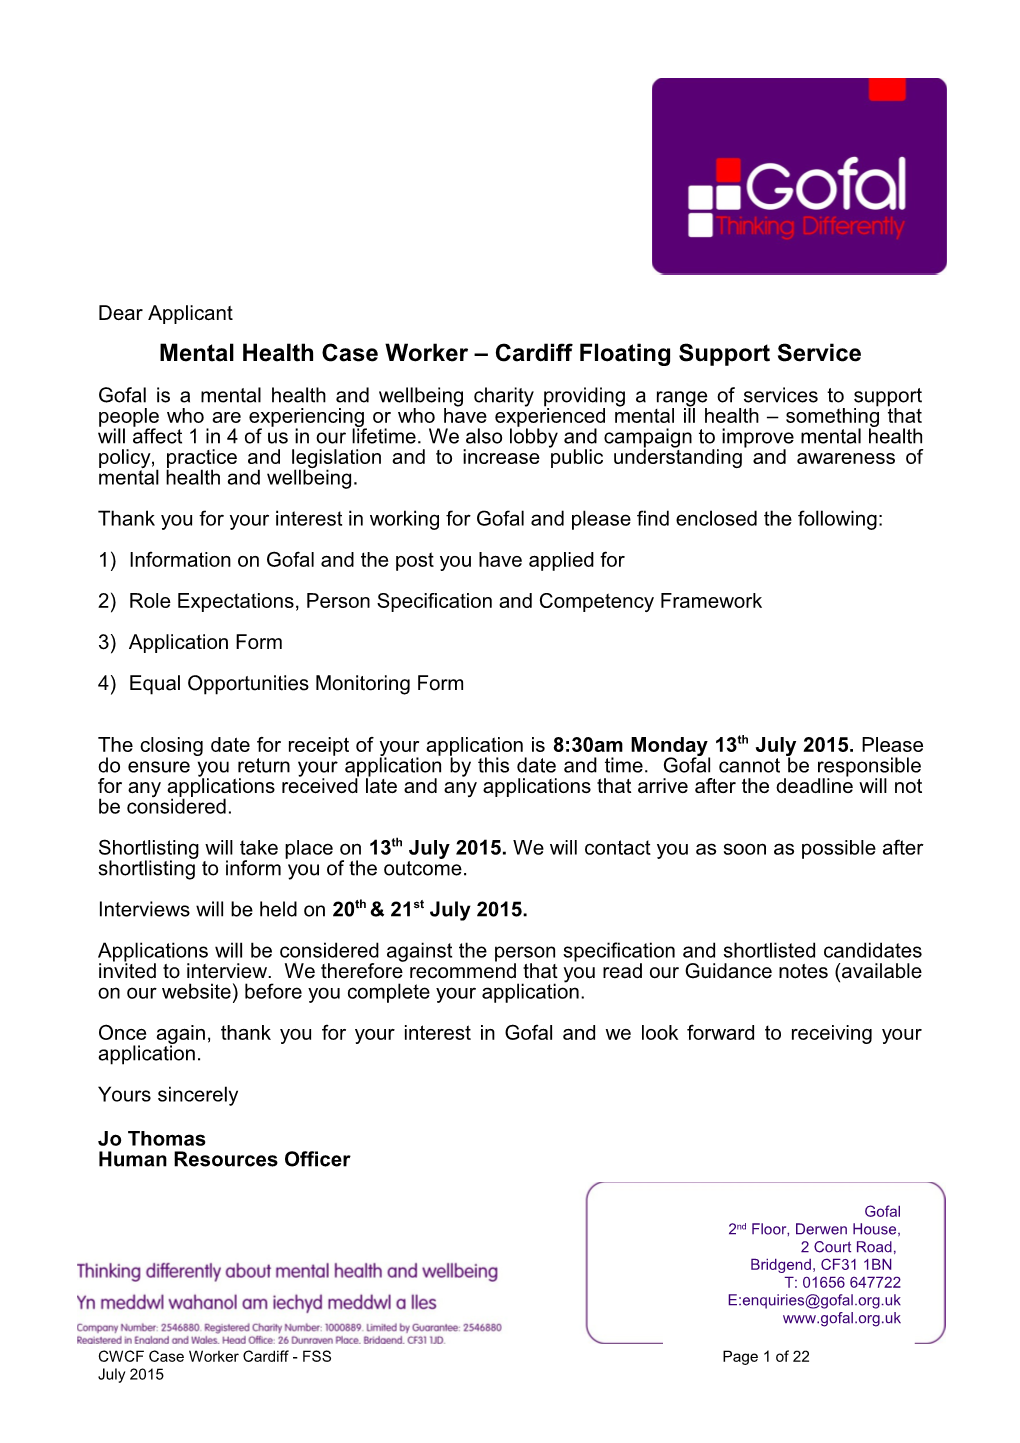 Mental Health Case Worker Cardifffloating Support Service